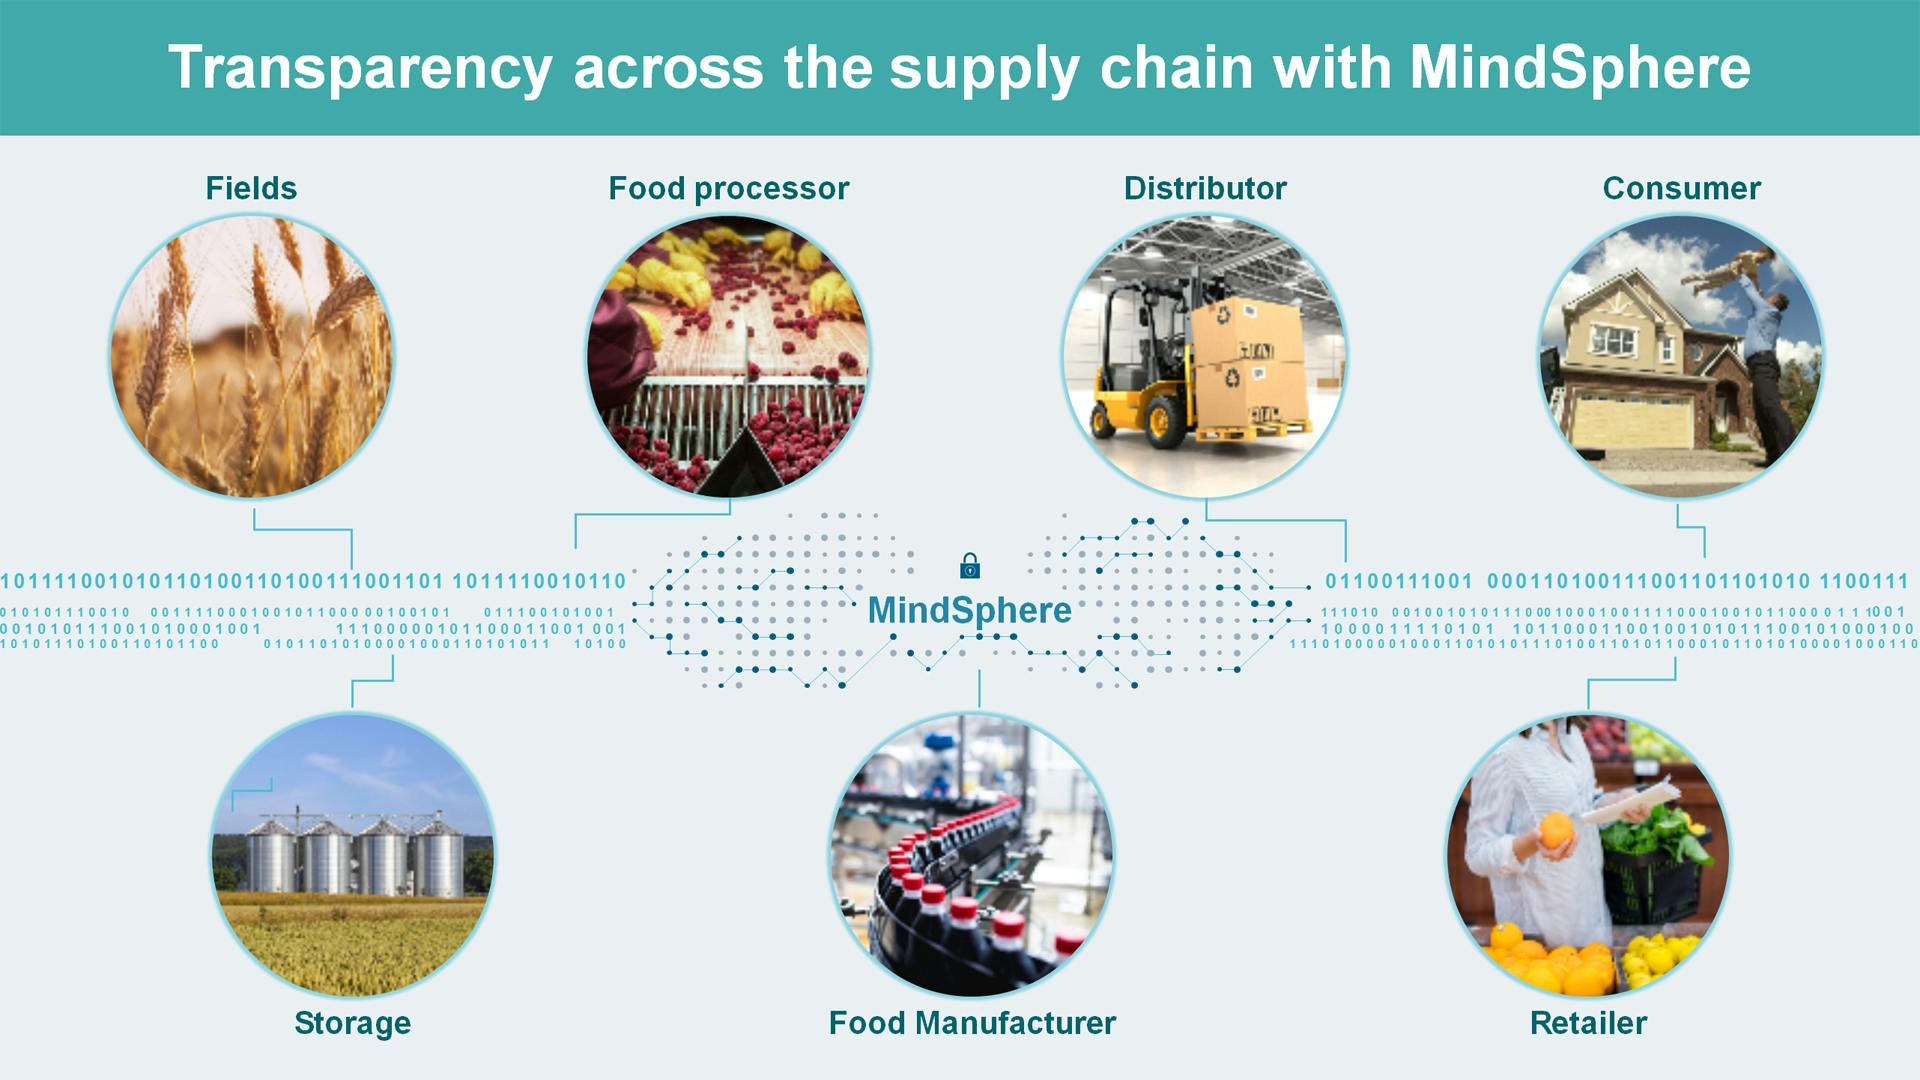 Unprecedented transparency with the digital twin of the supply chain